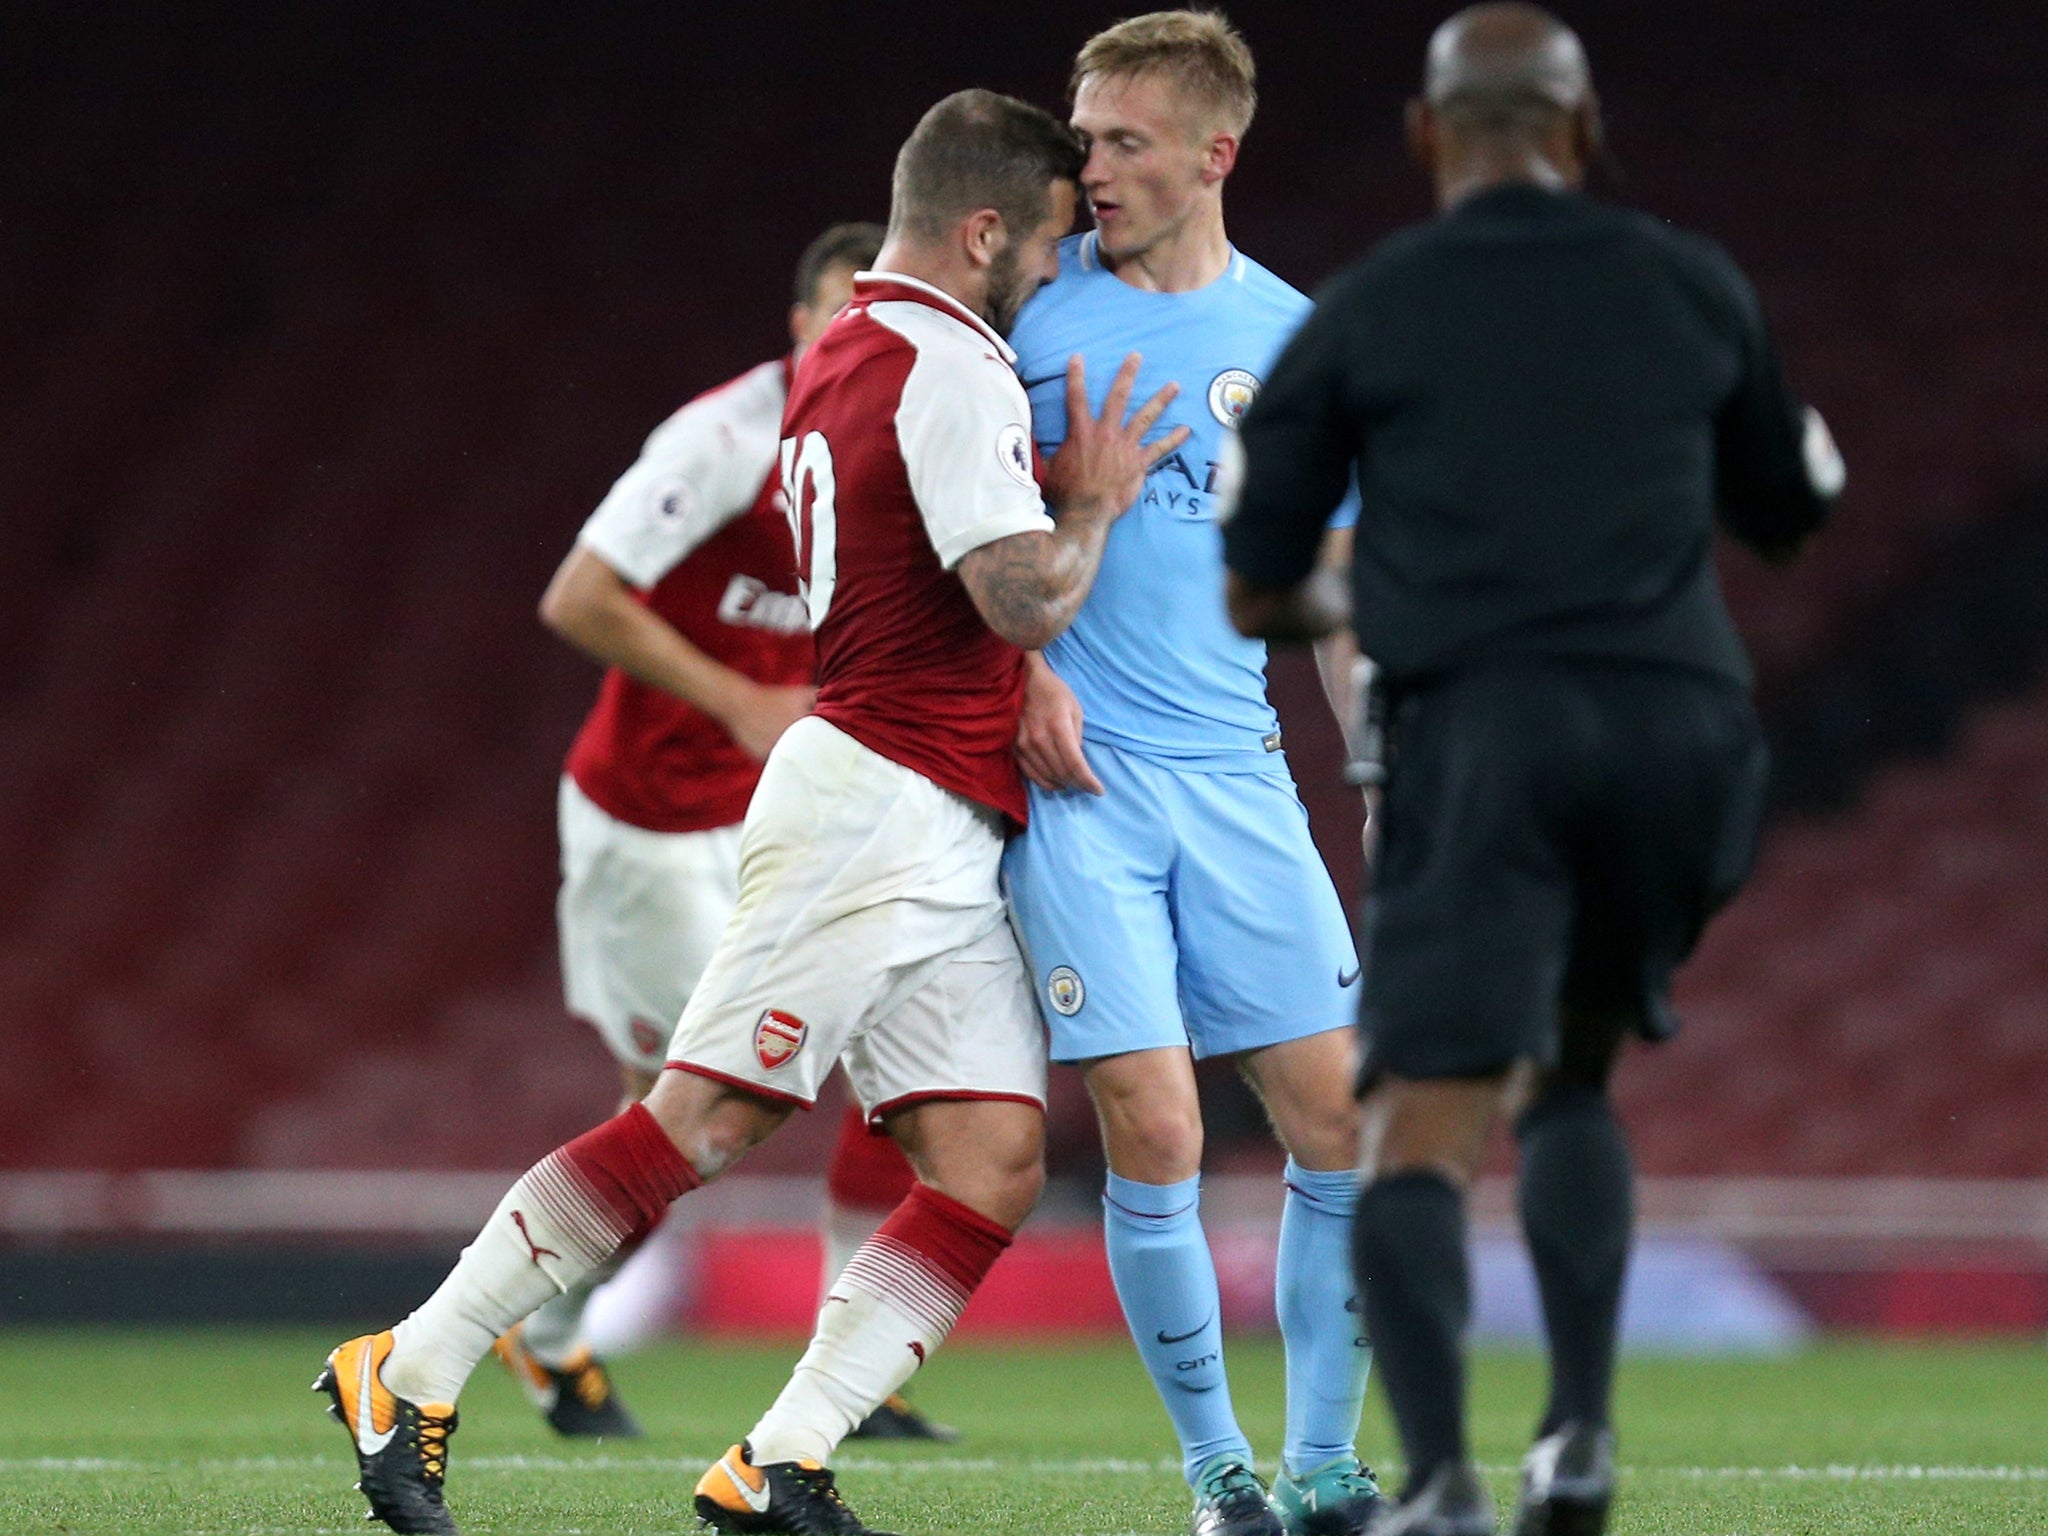 Wilshere thrusts his head into Smith after reacting badly to the tackle